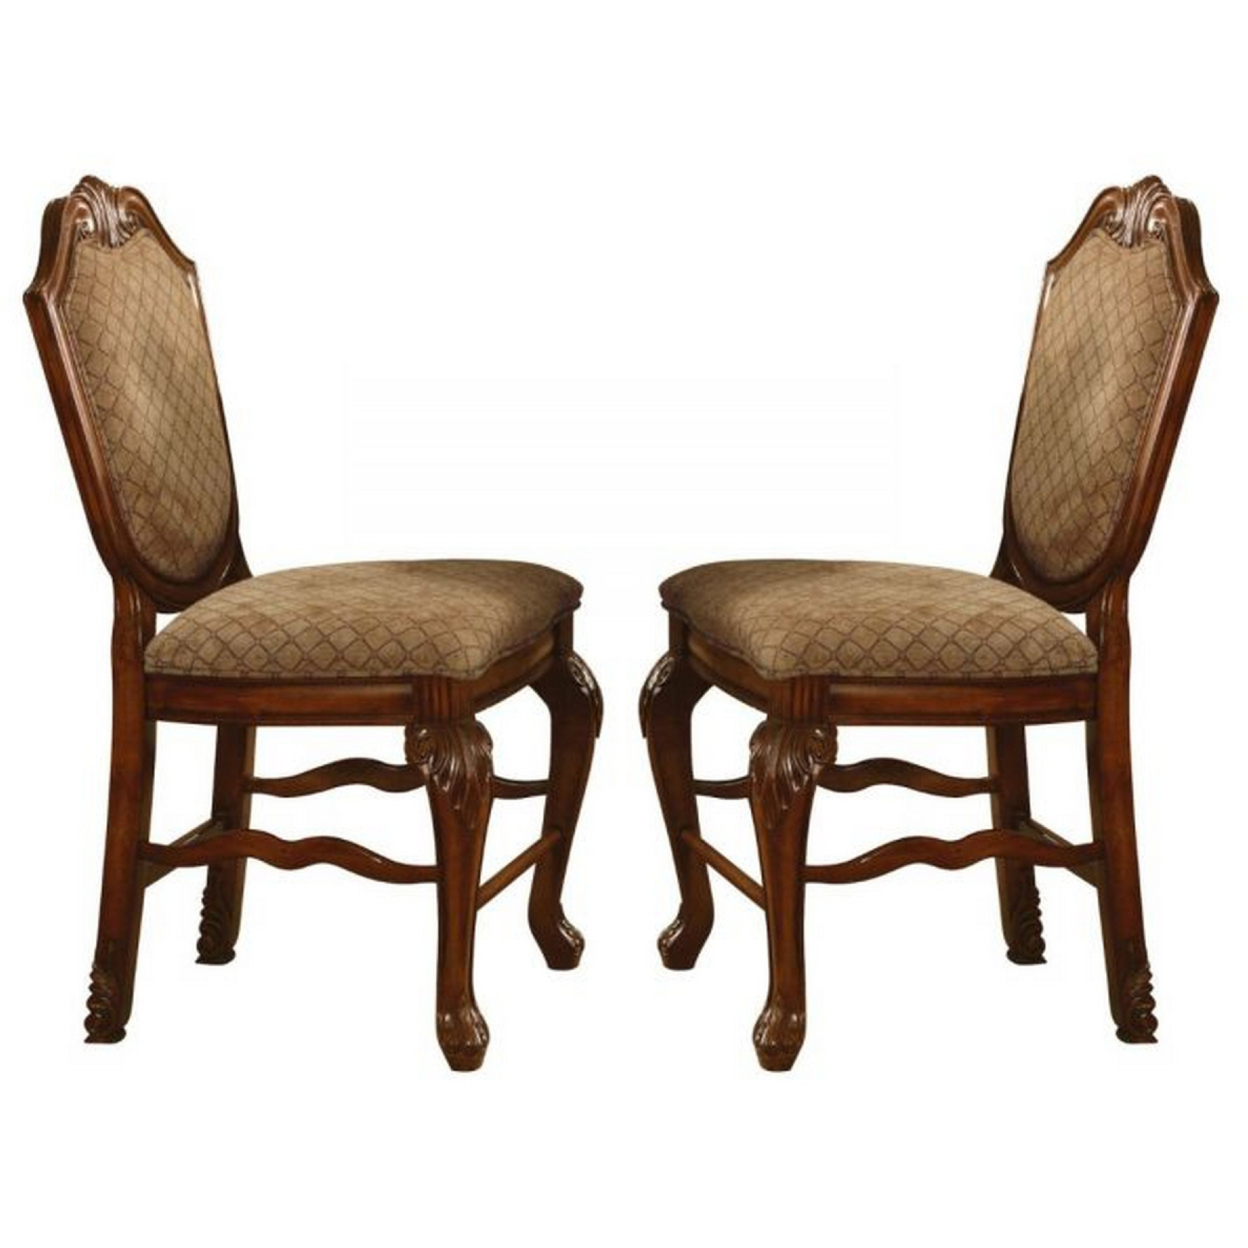 Counter Height Chair With Fabric Seat And Crown Top, Set Of 2, Brown- Saltoro Sherpi